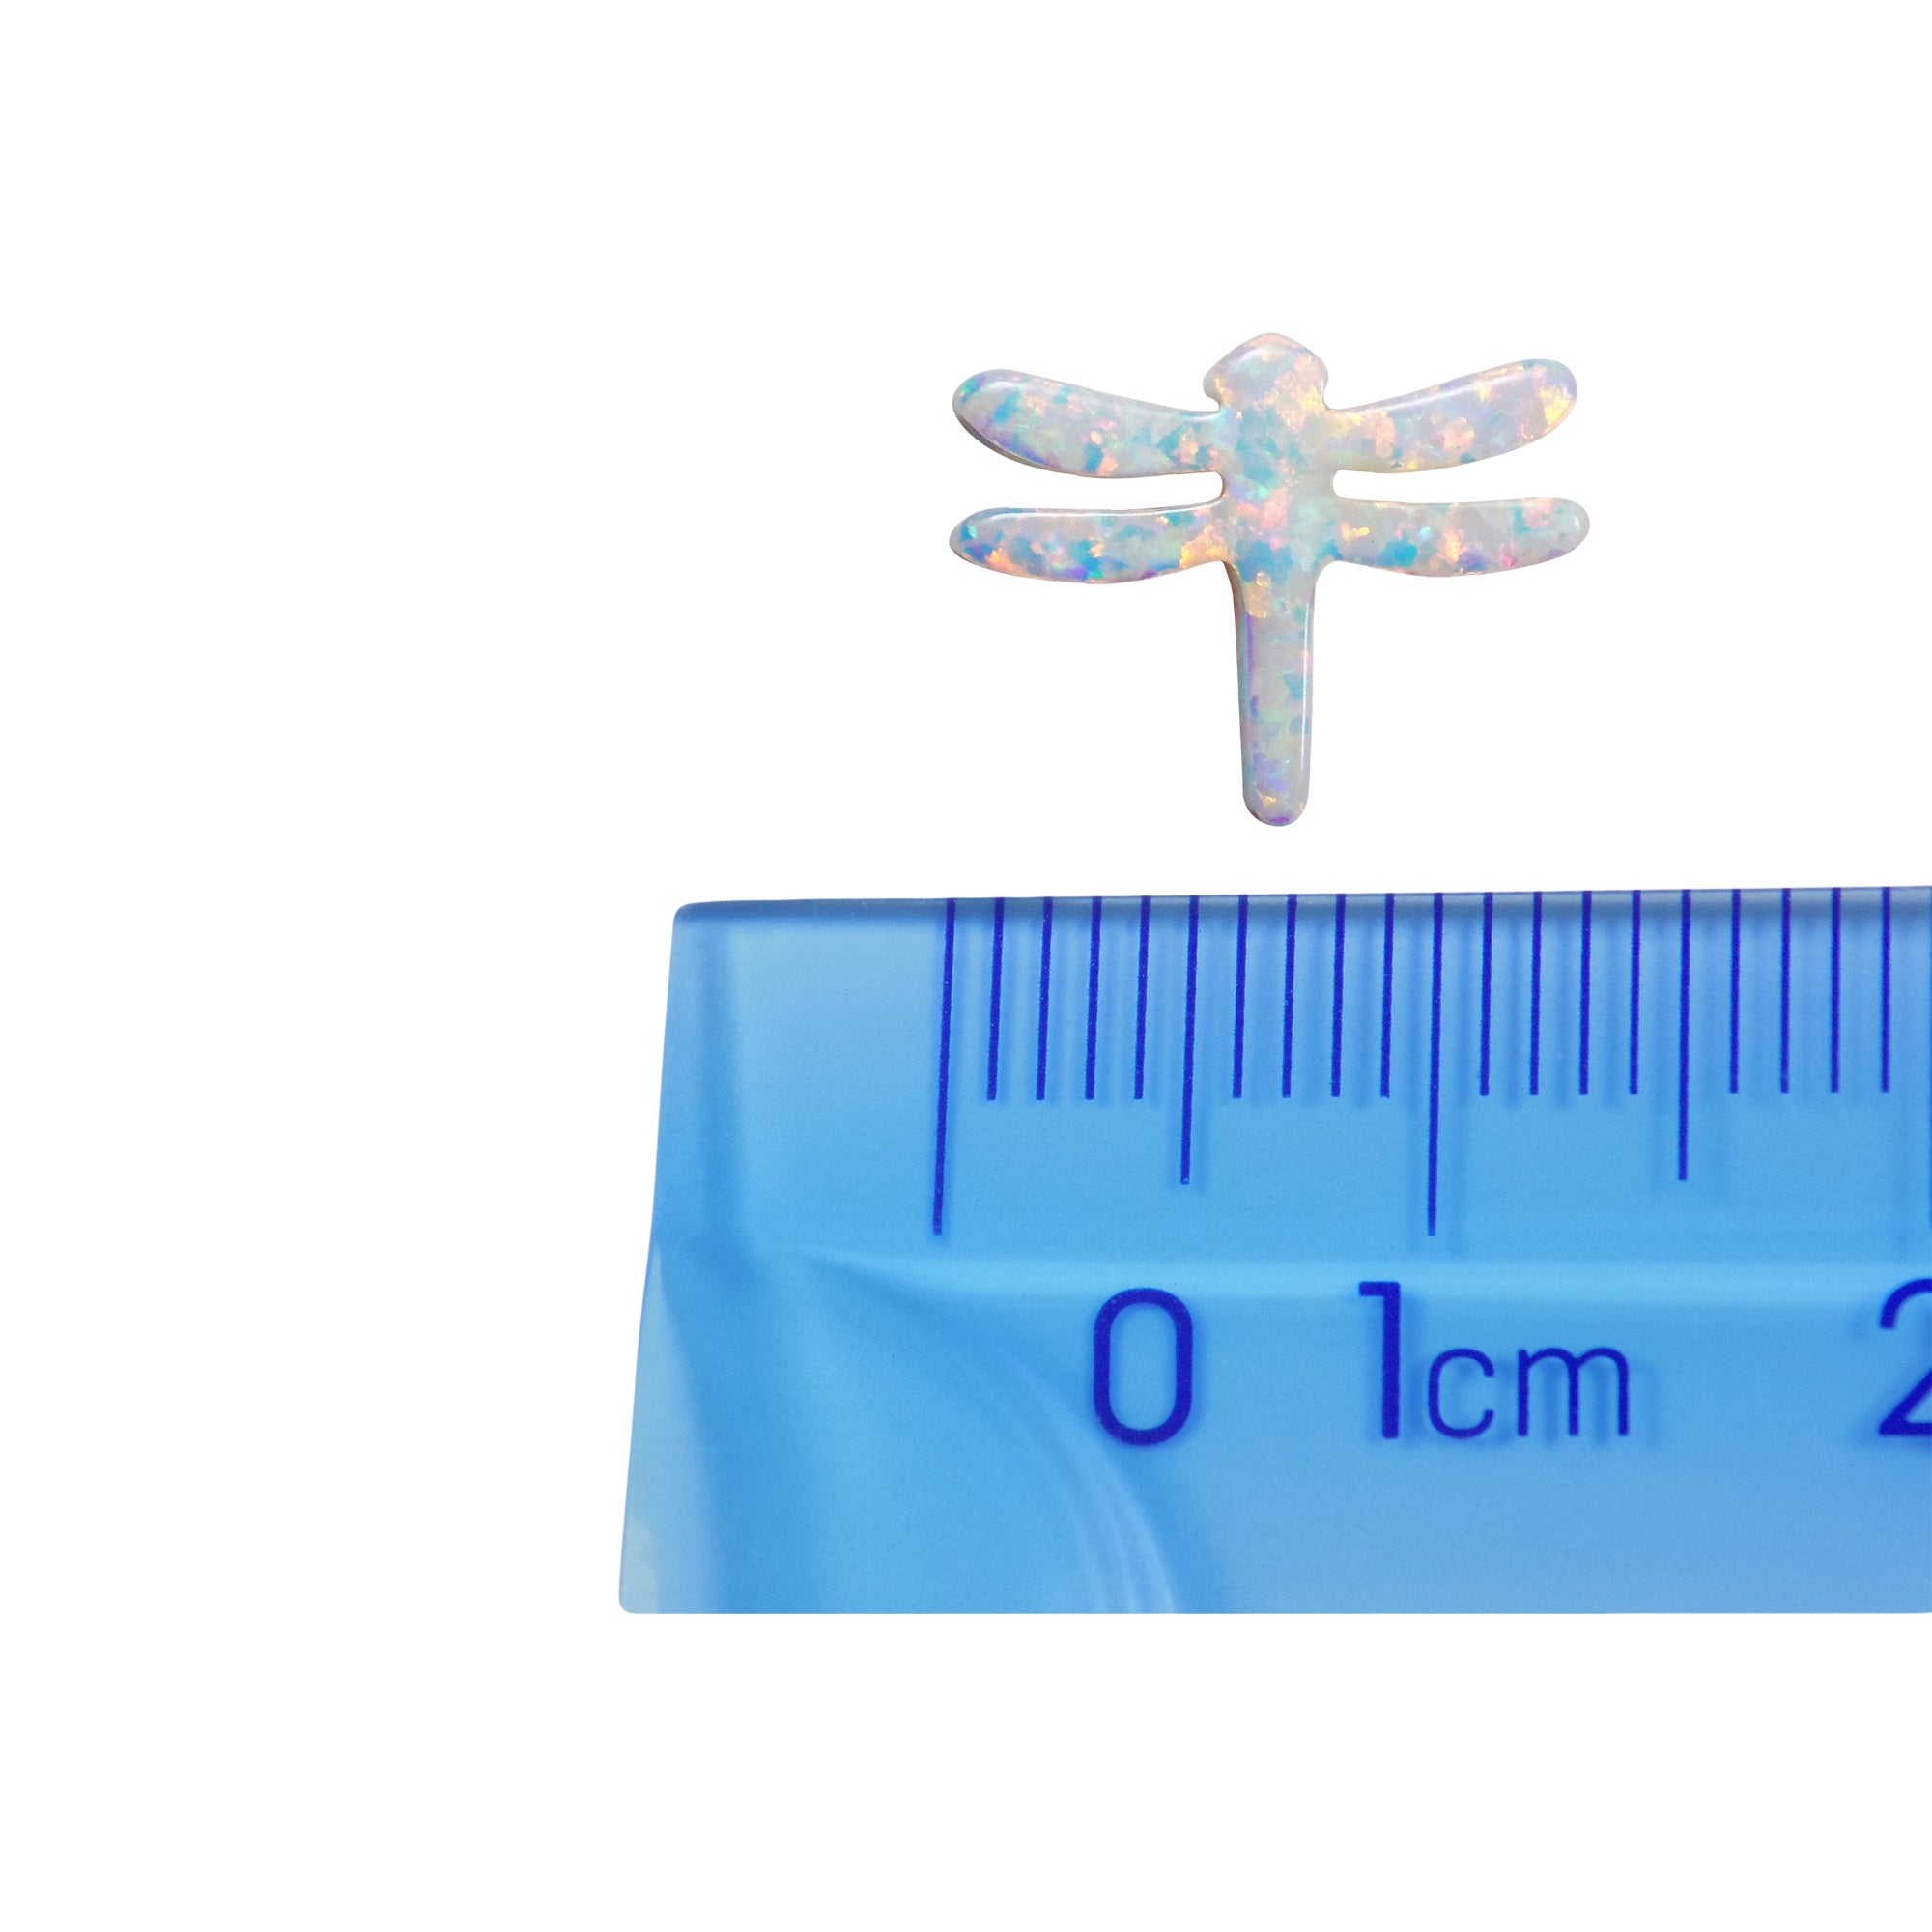 Opal Dragonfly Charm, Dragonfly Opal Bead Charm Pendant Size 10x13mm, Authentic Lab-created White Opal Dragonfly Bead, USA Seller